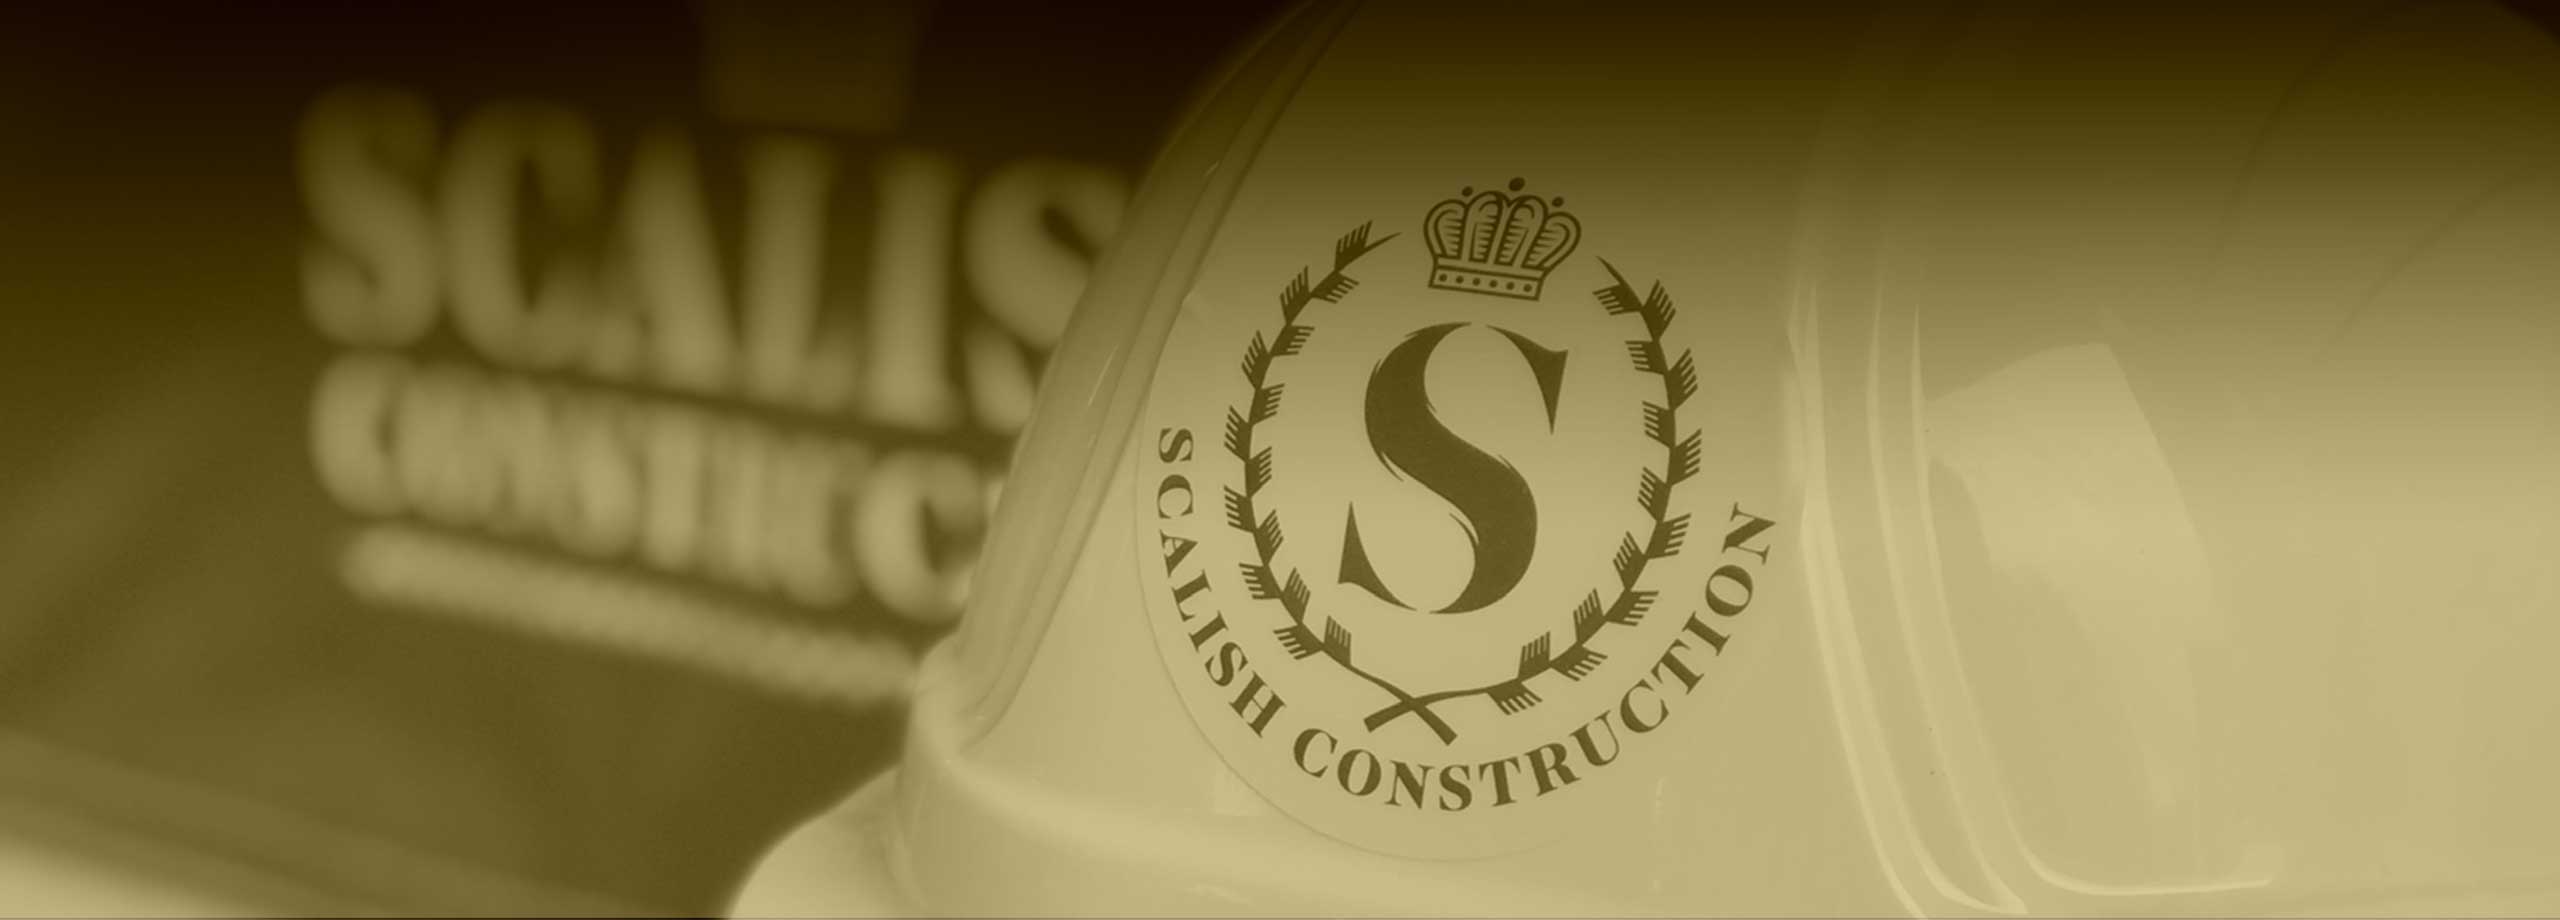 Our Awards | Scalish Construction